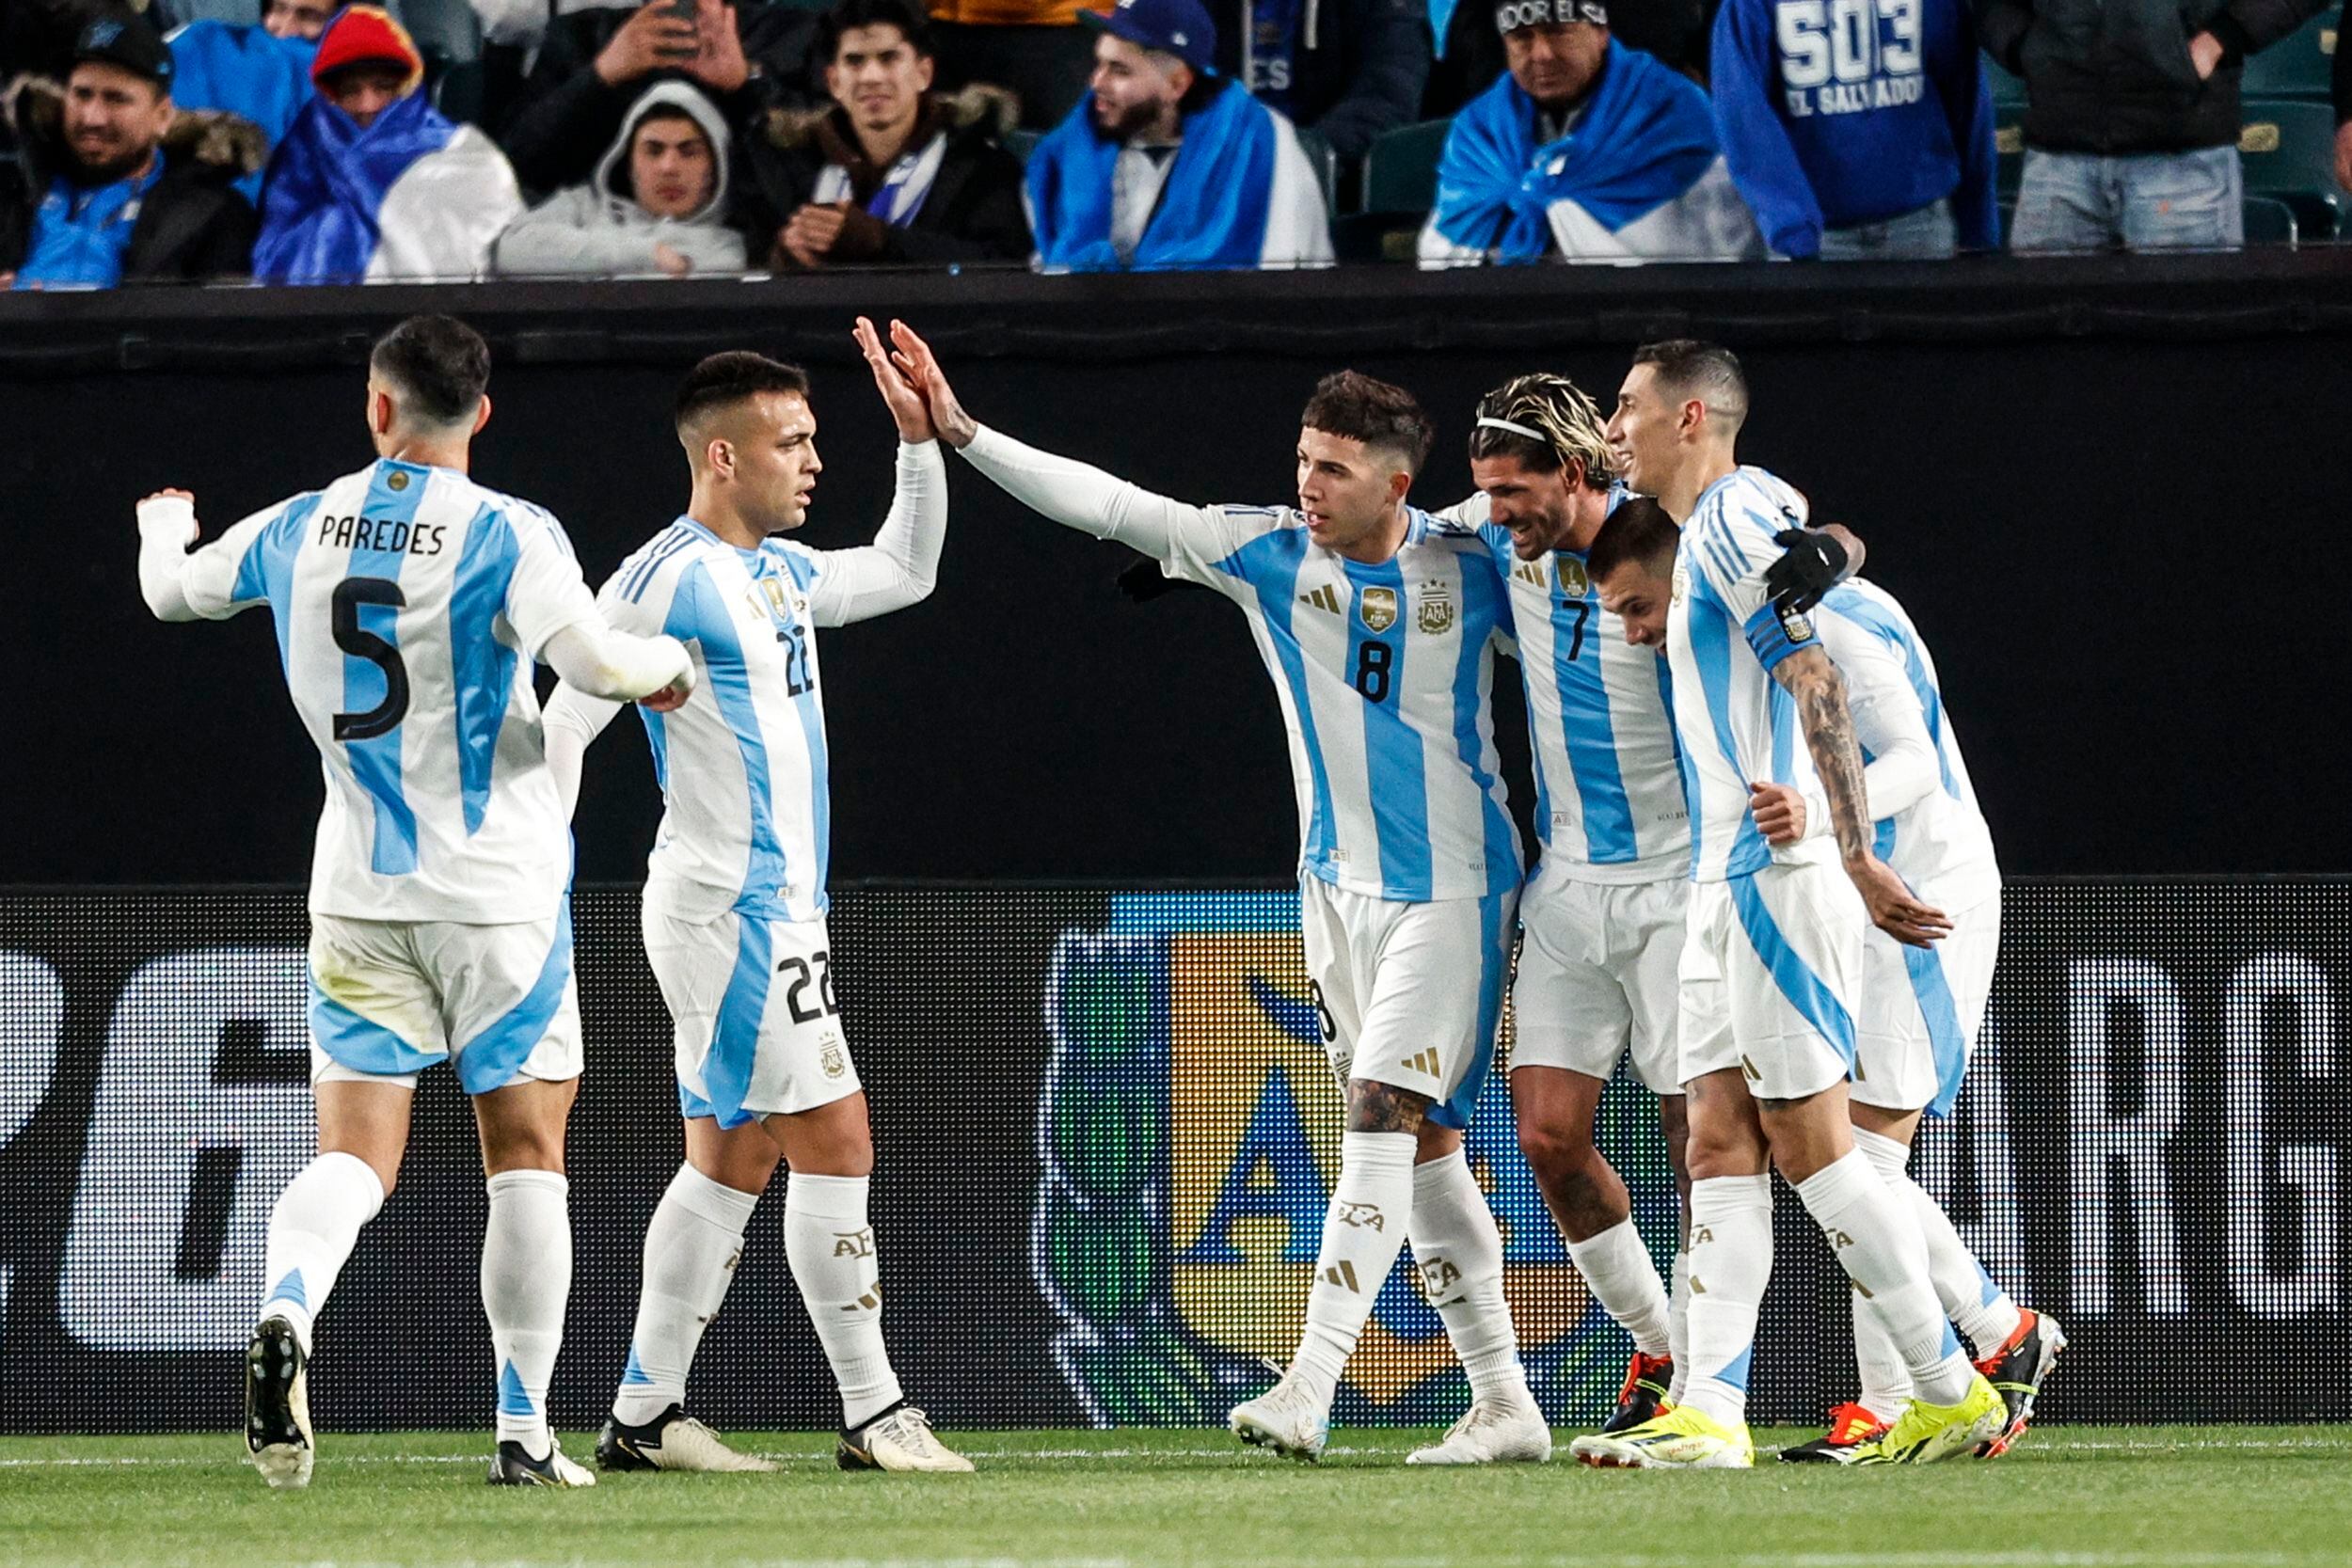 Argentina showed why they're World Cup champions in 3-0 win over El Salvador